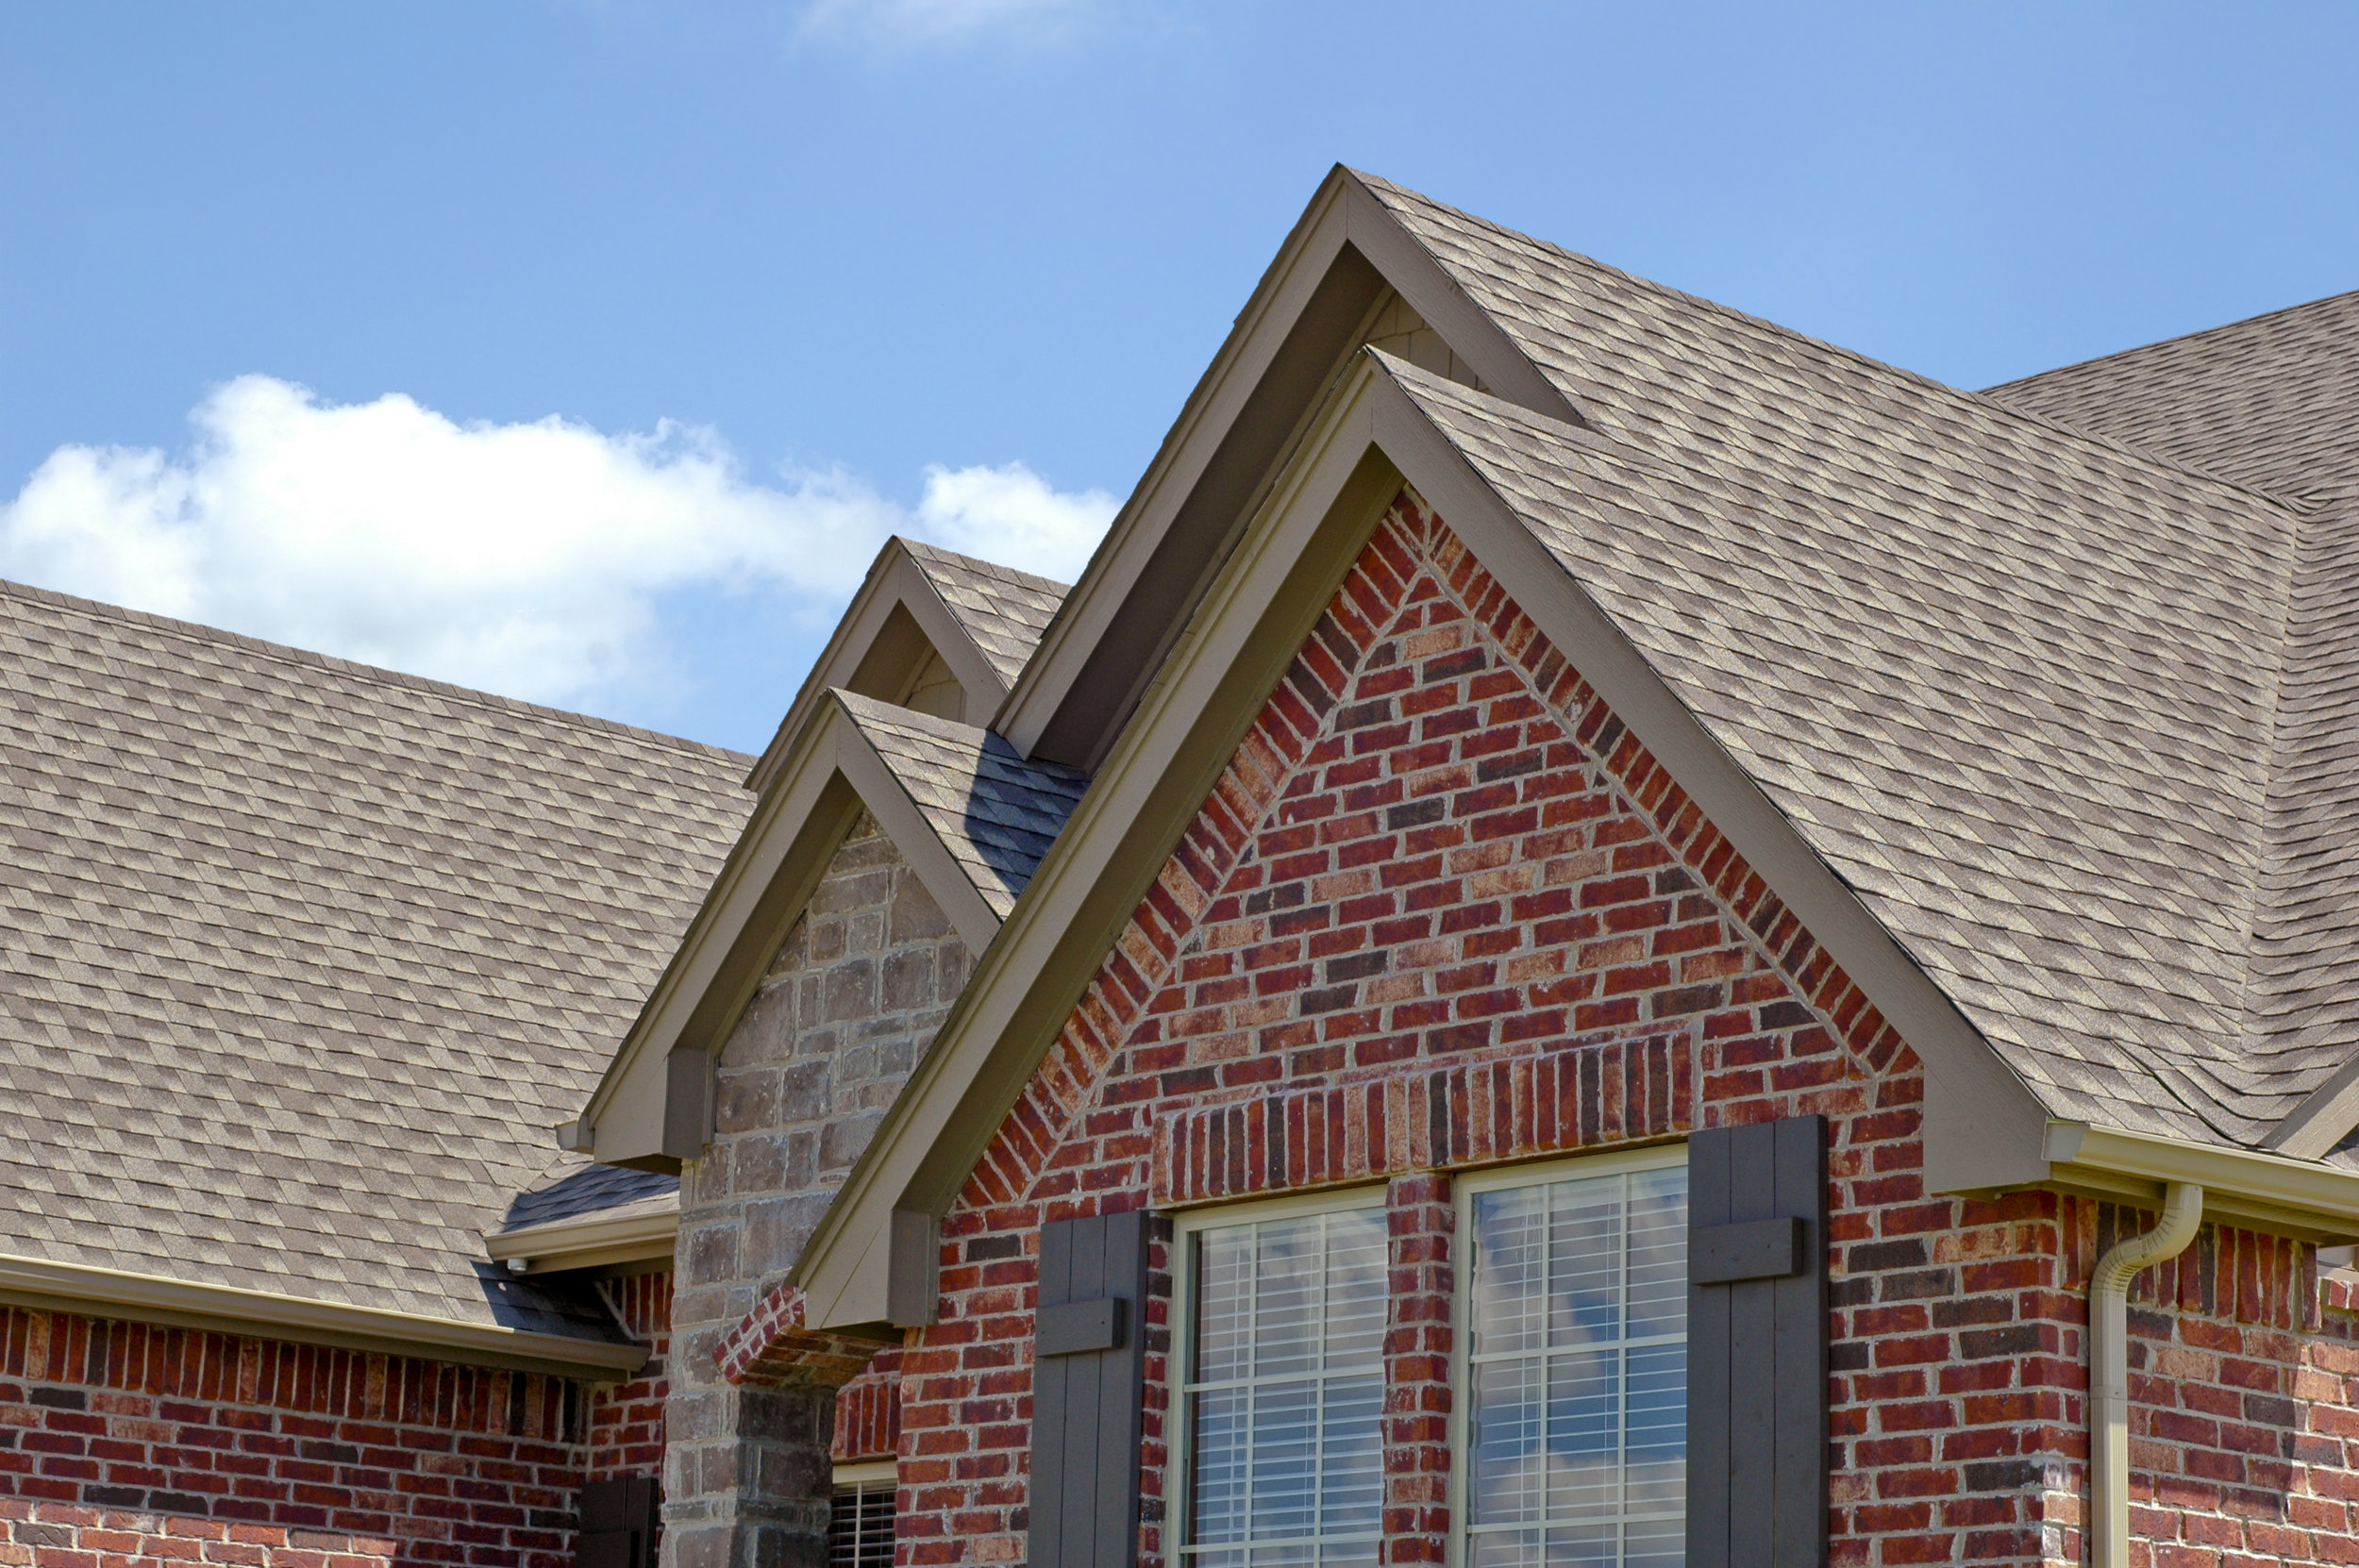   Protect Your Home With Affordable Roofing   Learn More   